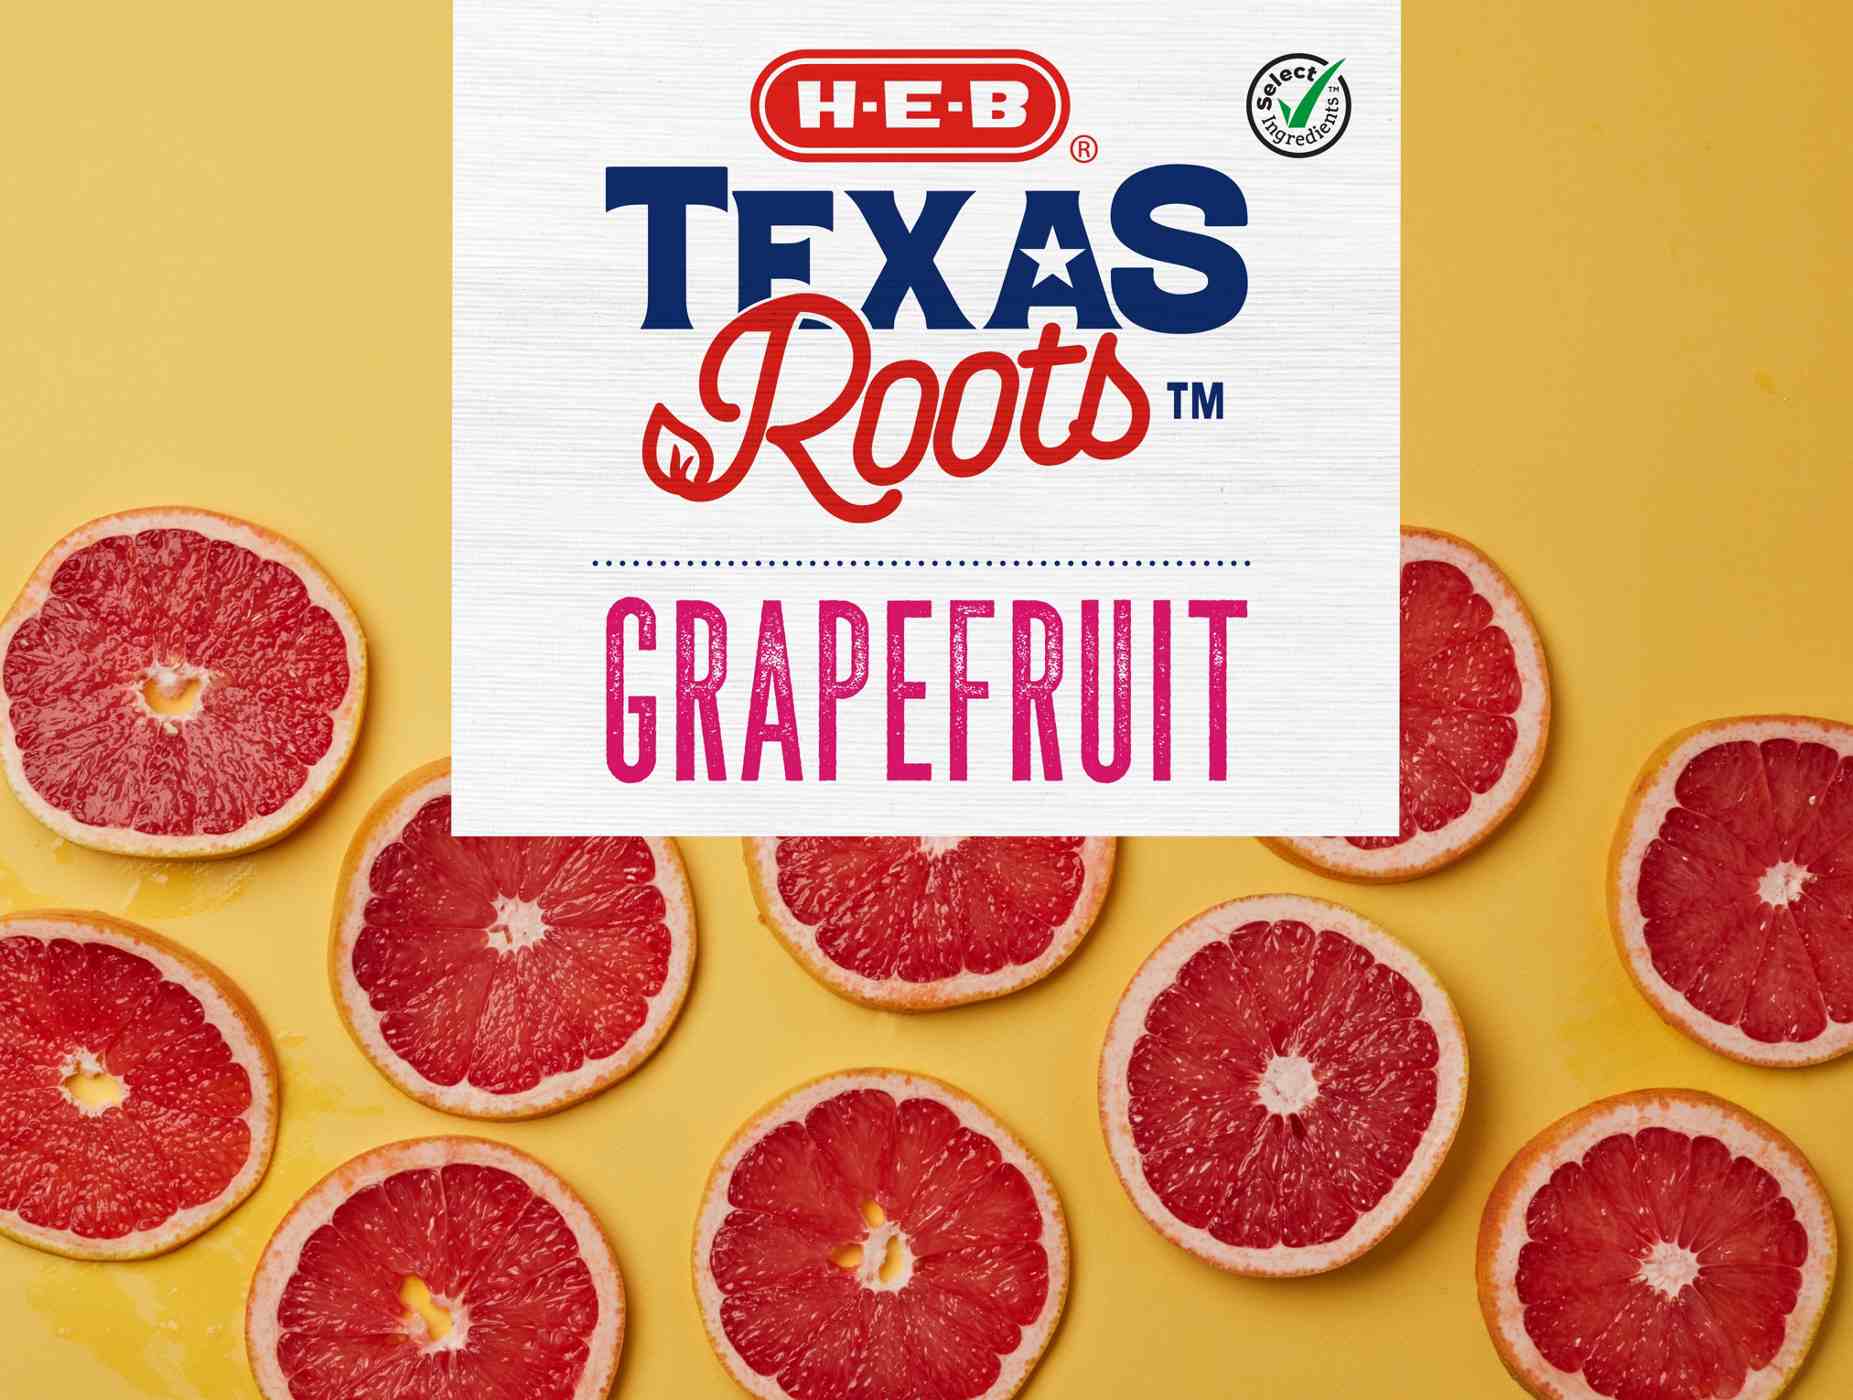 H-E-B Texas Roots Fresh Grapefruit - Texas-Size Pack; image 3 of 3